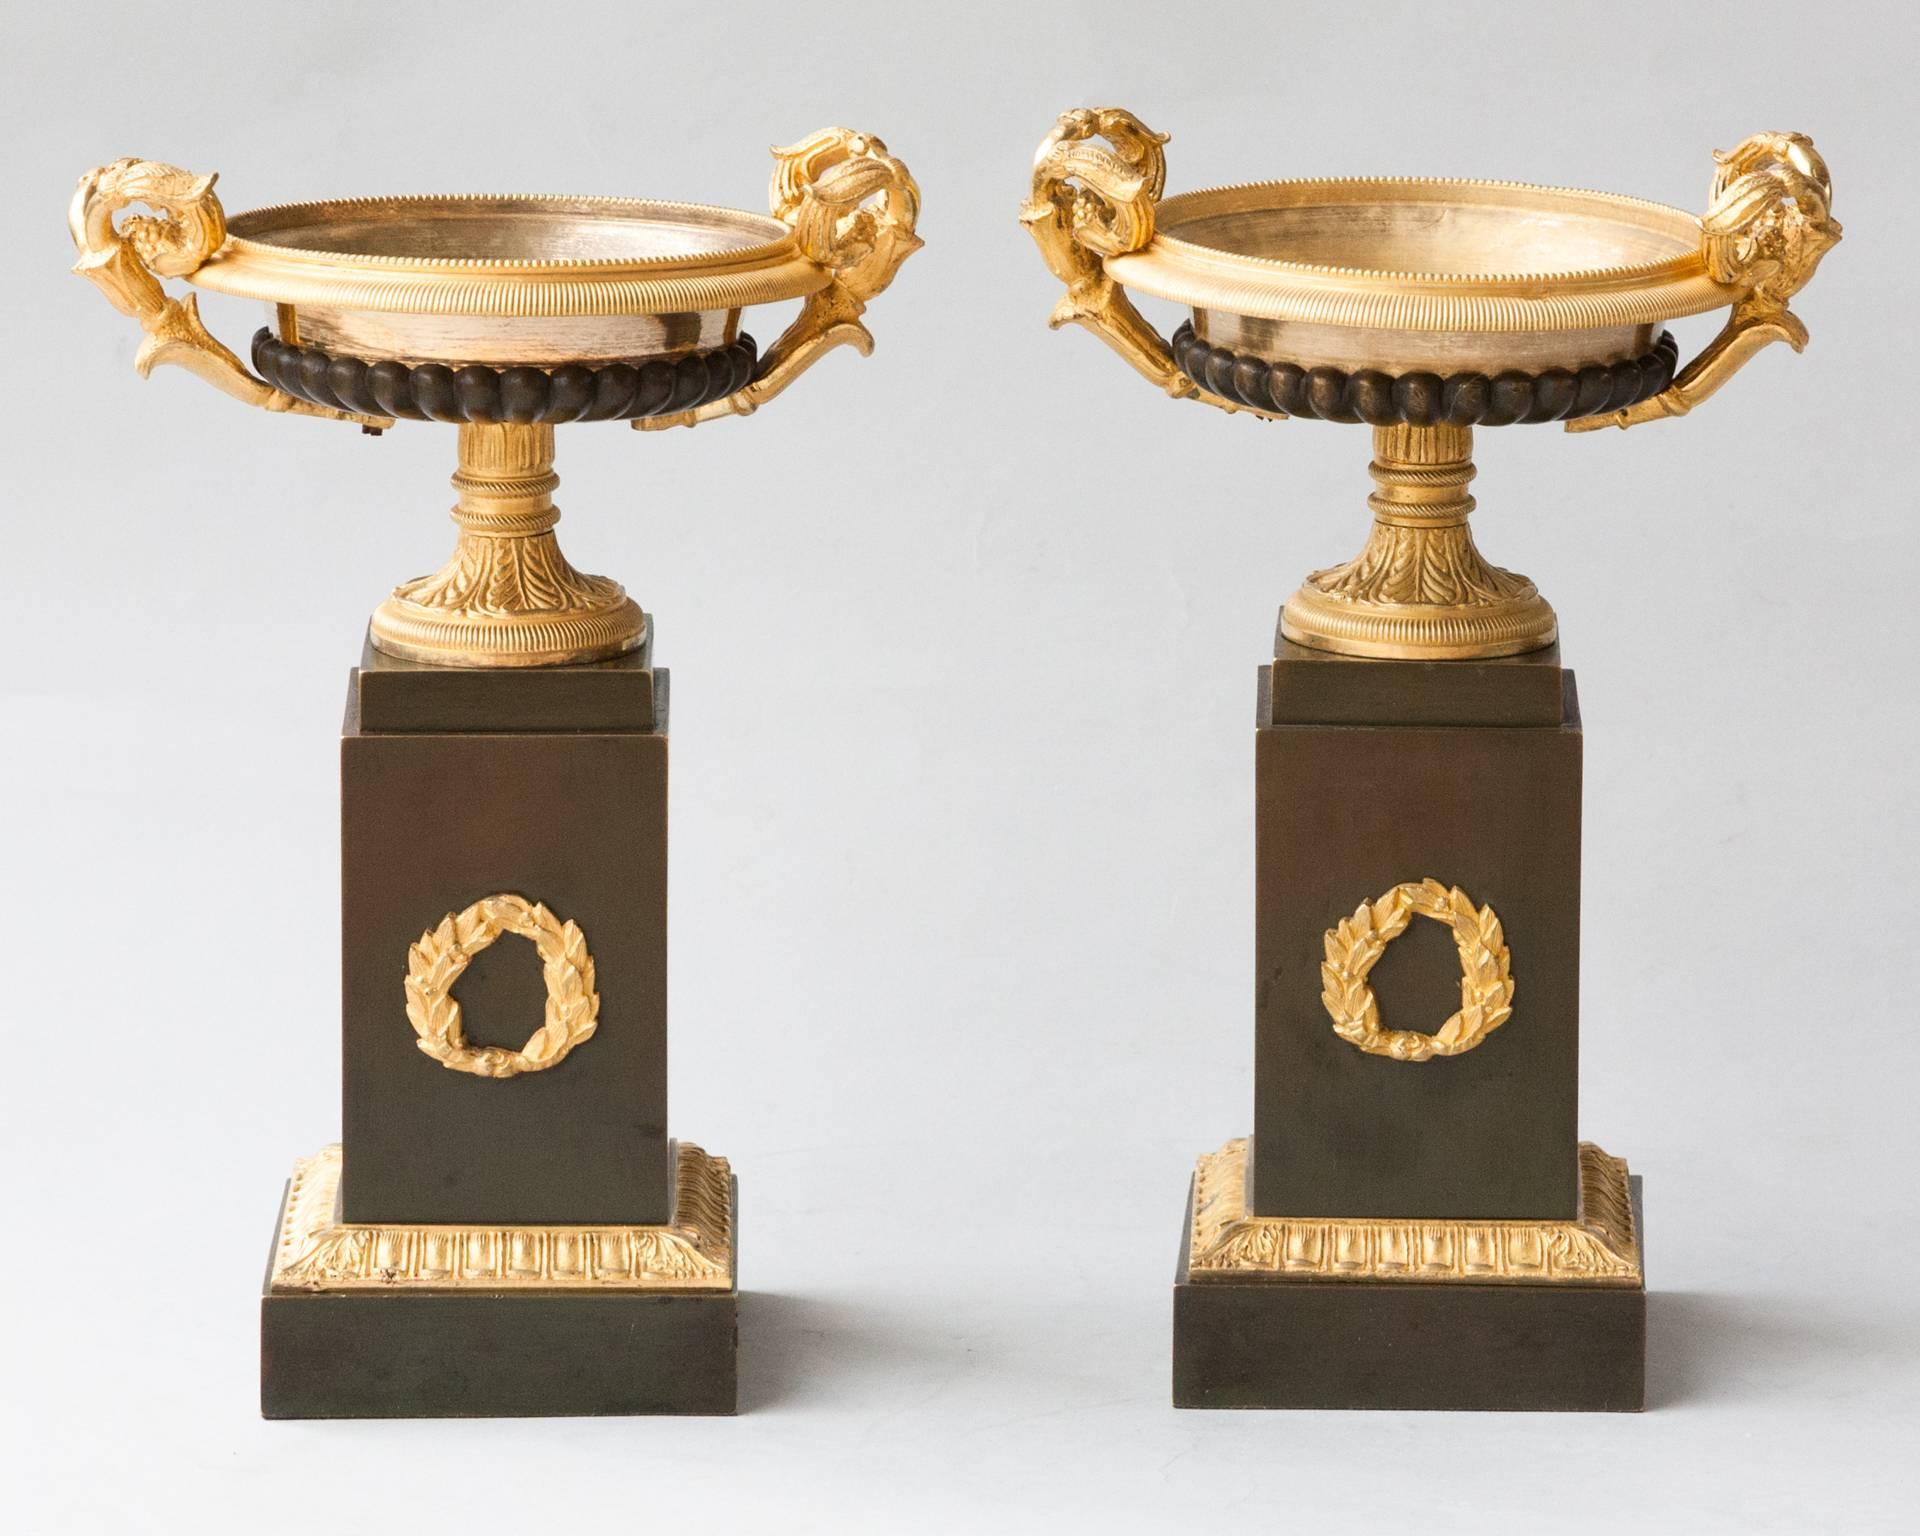 European Pair of Restauration Period Gilt and Patinated Bronze Tazza Urns For Sale